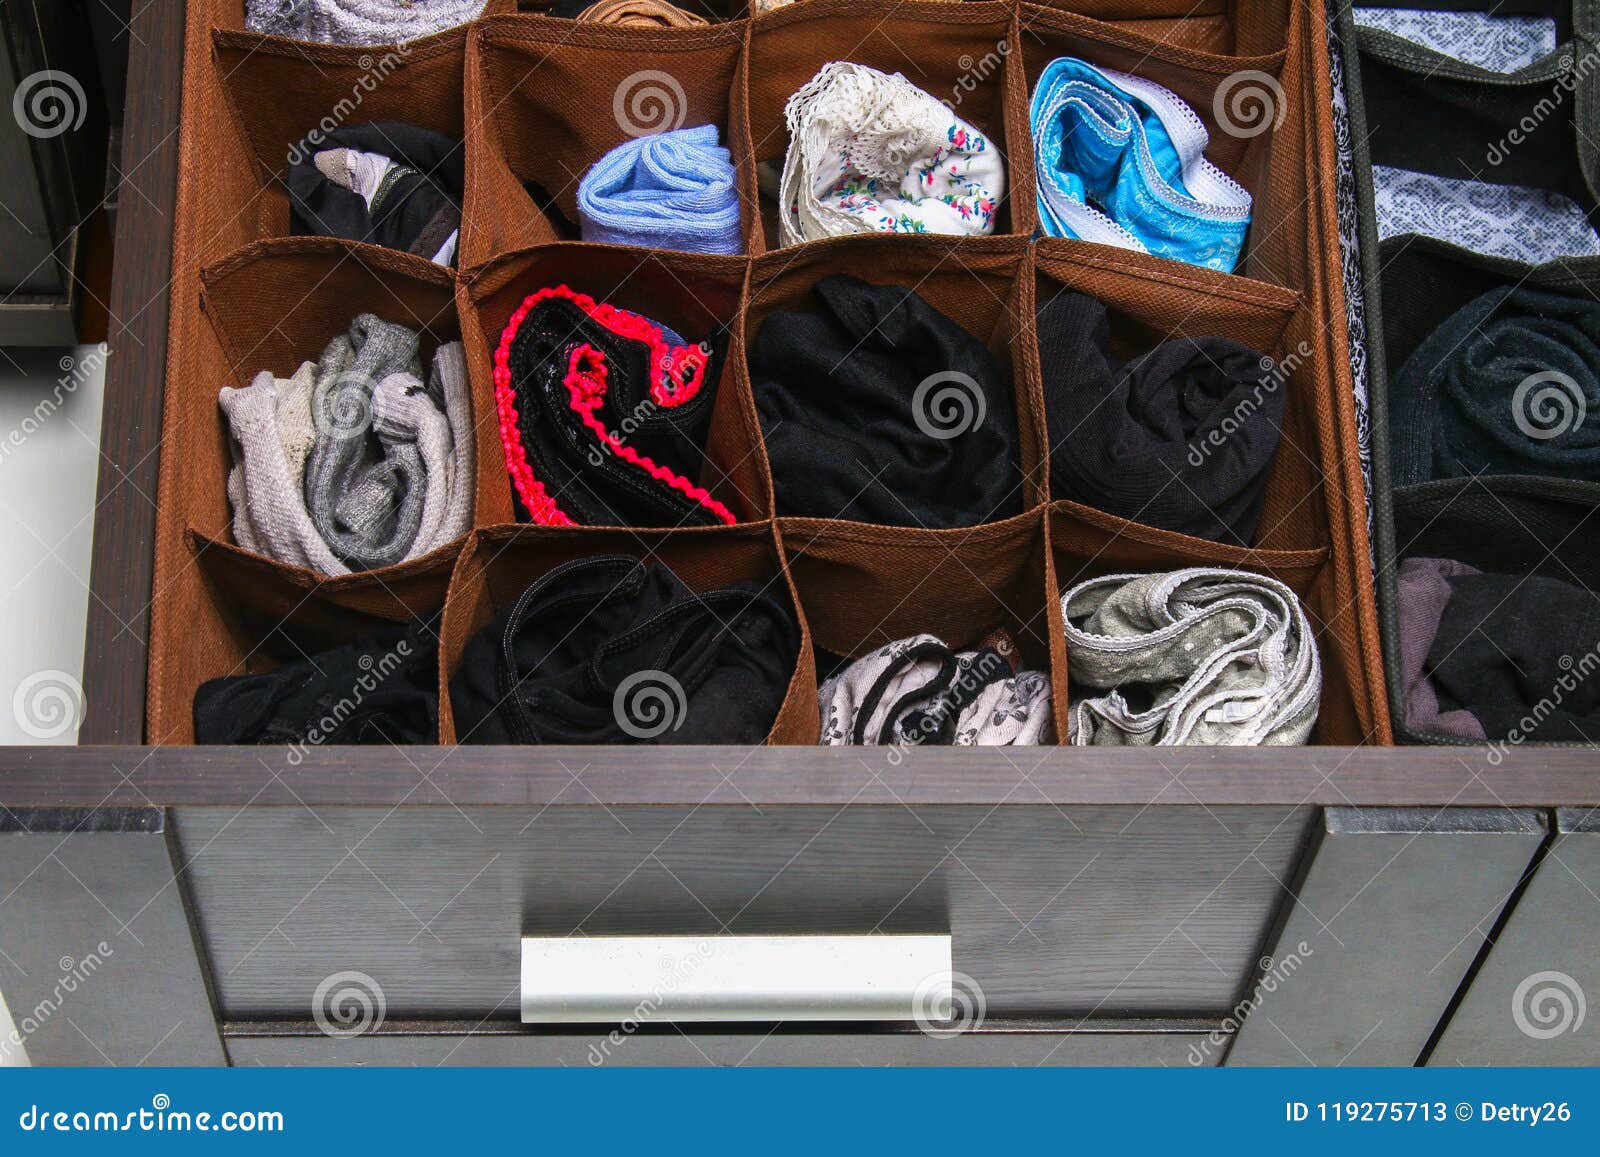 Organization of Storage of Socks and Panties in the Drawer of the